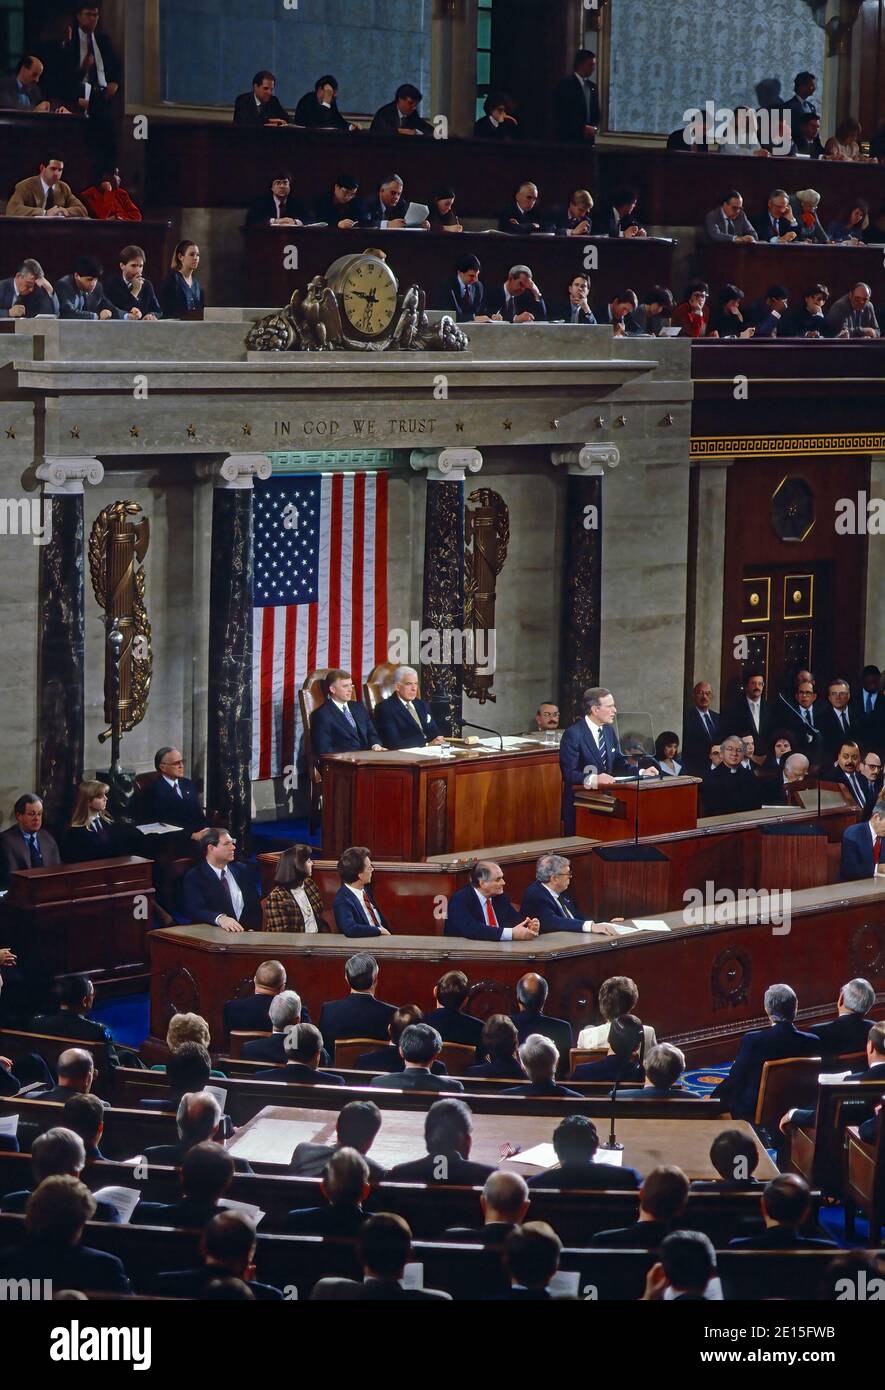 Washington, DC. USA, March 6, 1991 President George H.W. Bush delivers his Address Before a Joint Session of the Congress on the Cessation of the Persian Gulf Conflict, Vice President Daniel Quayle and Speaker of the House Tom Foley are seated behind him Stock Photo